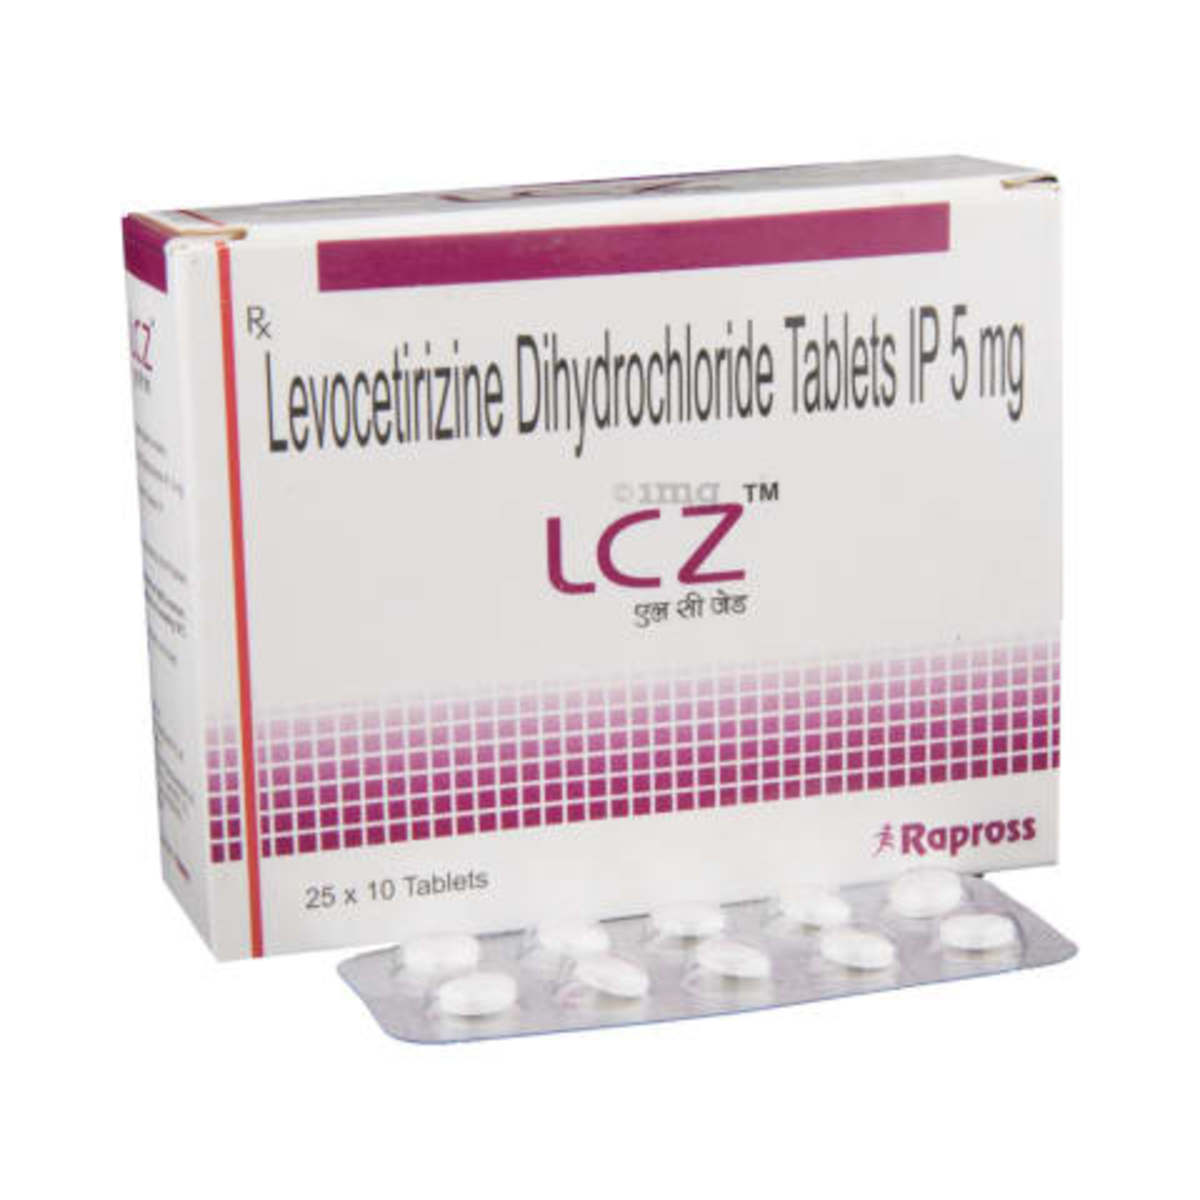 LCZ: Uses, Benefits, Dosage, Side Effects, Precautions?